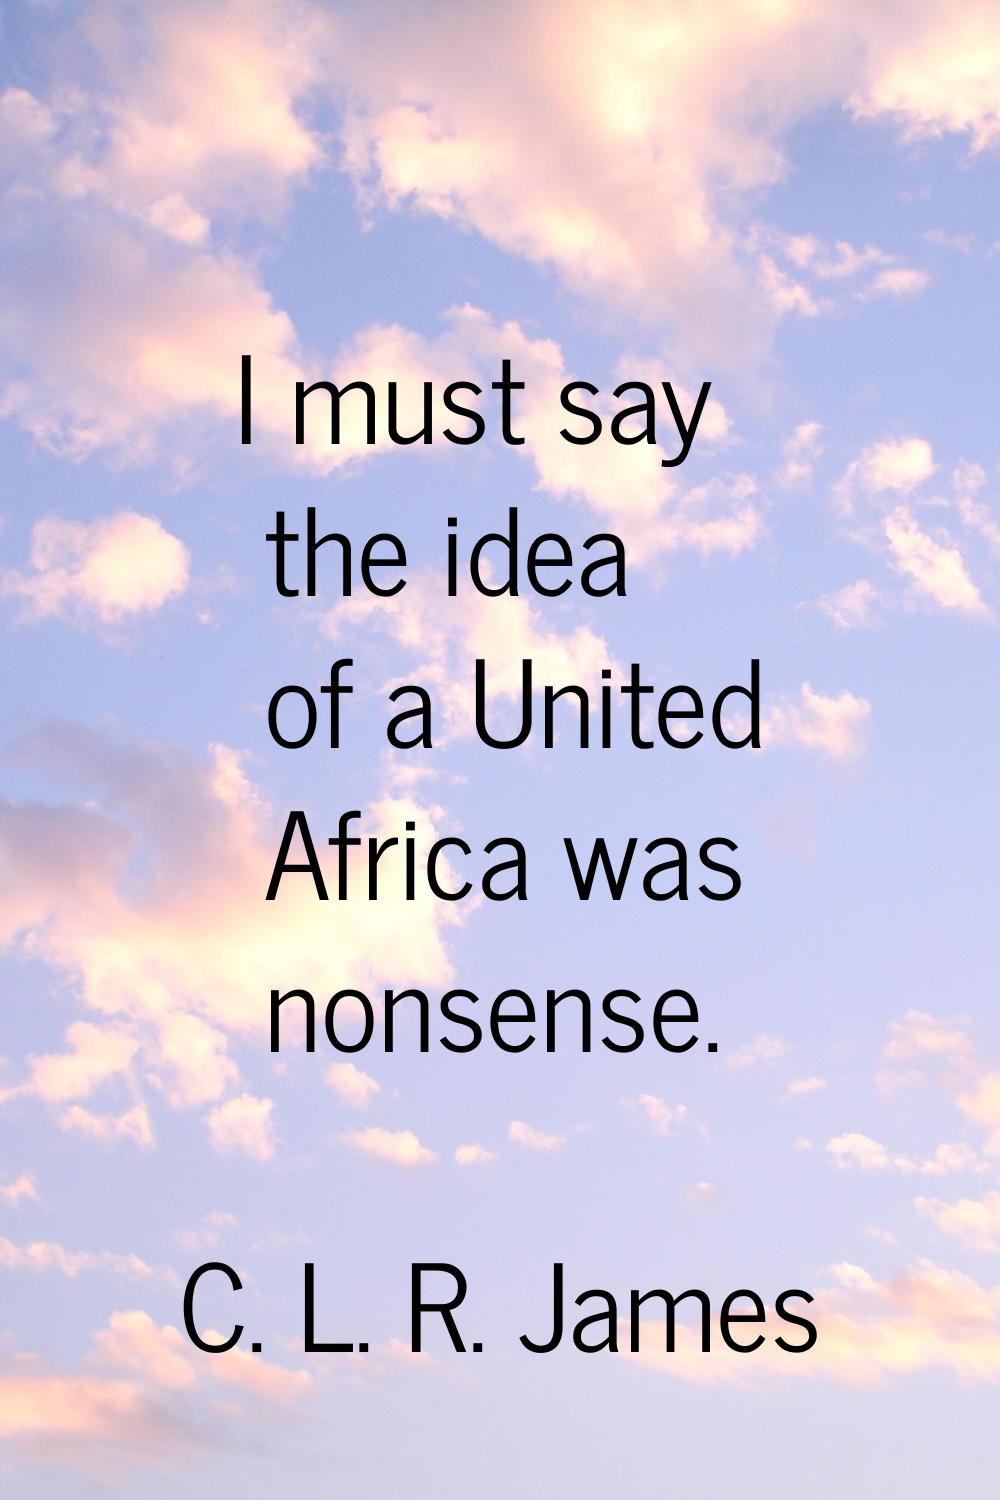 I must say the idea of a United Africa was nonsense.